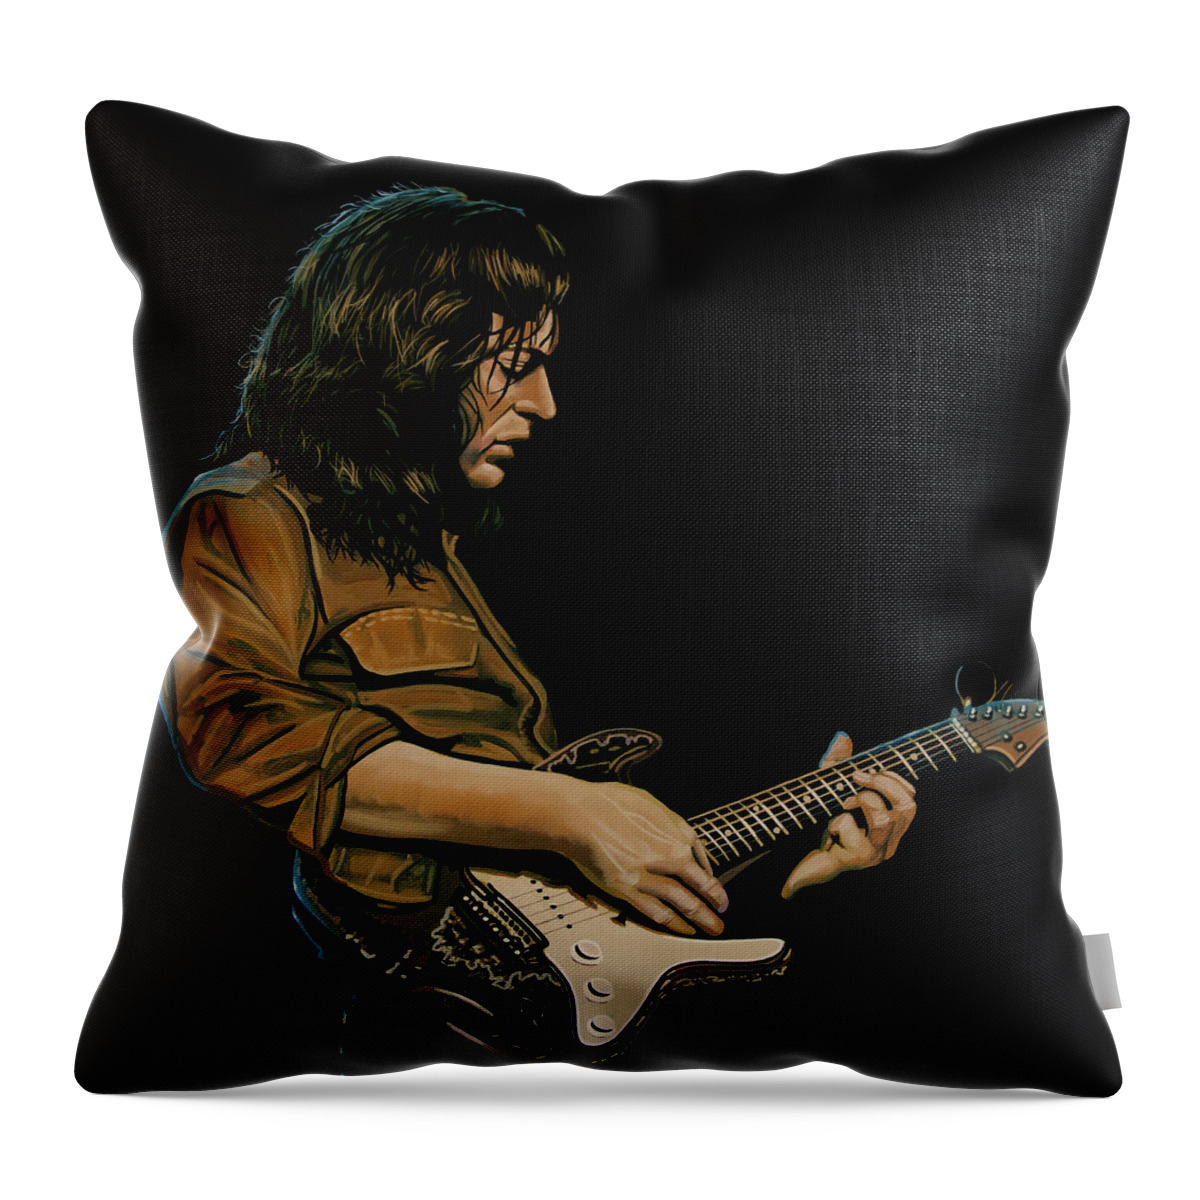 Rory Gallagher Throw Pillow featuring the painting Rory Gallagher Painting by Paul Meijering